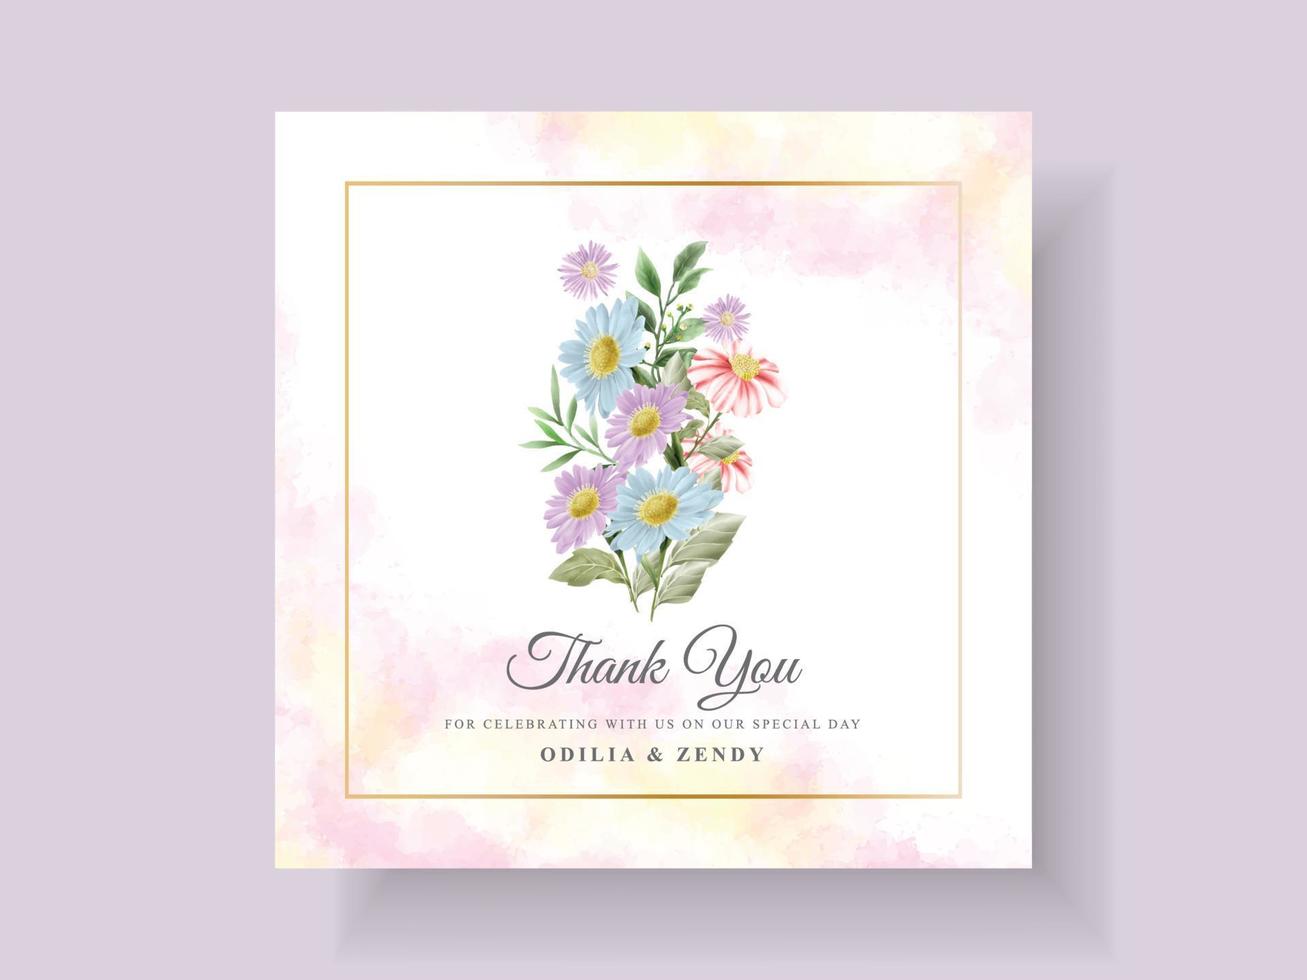 Wedding invitation card with beautiful flower and leaves watercolor vector